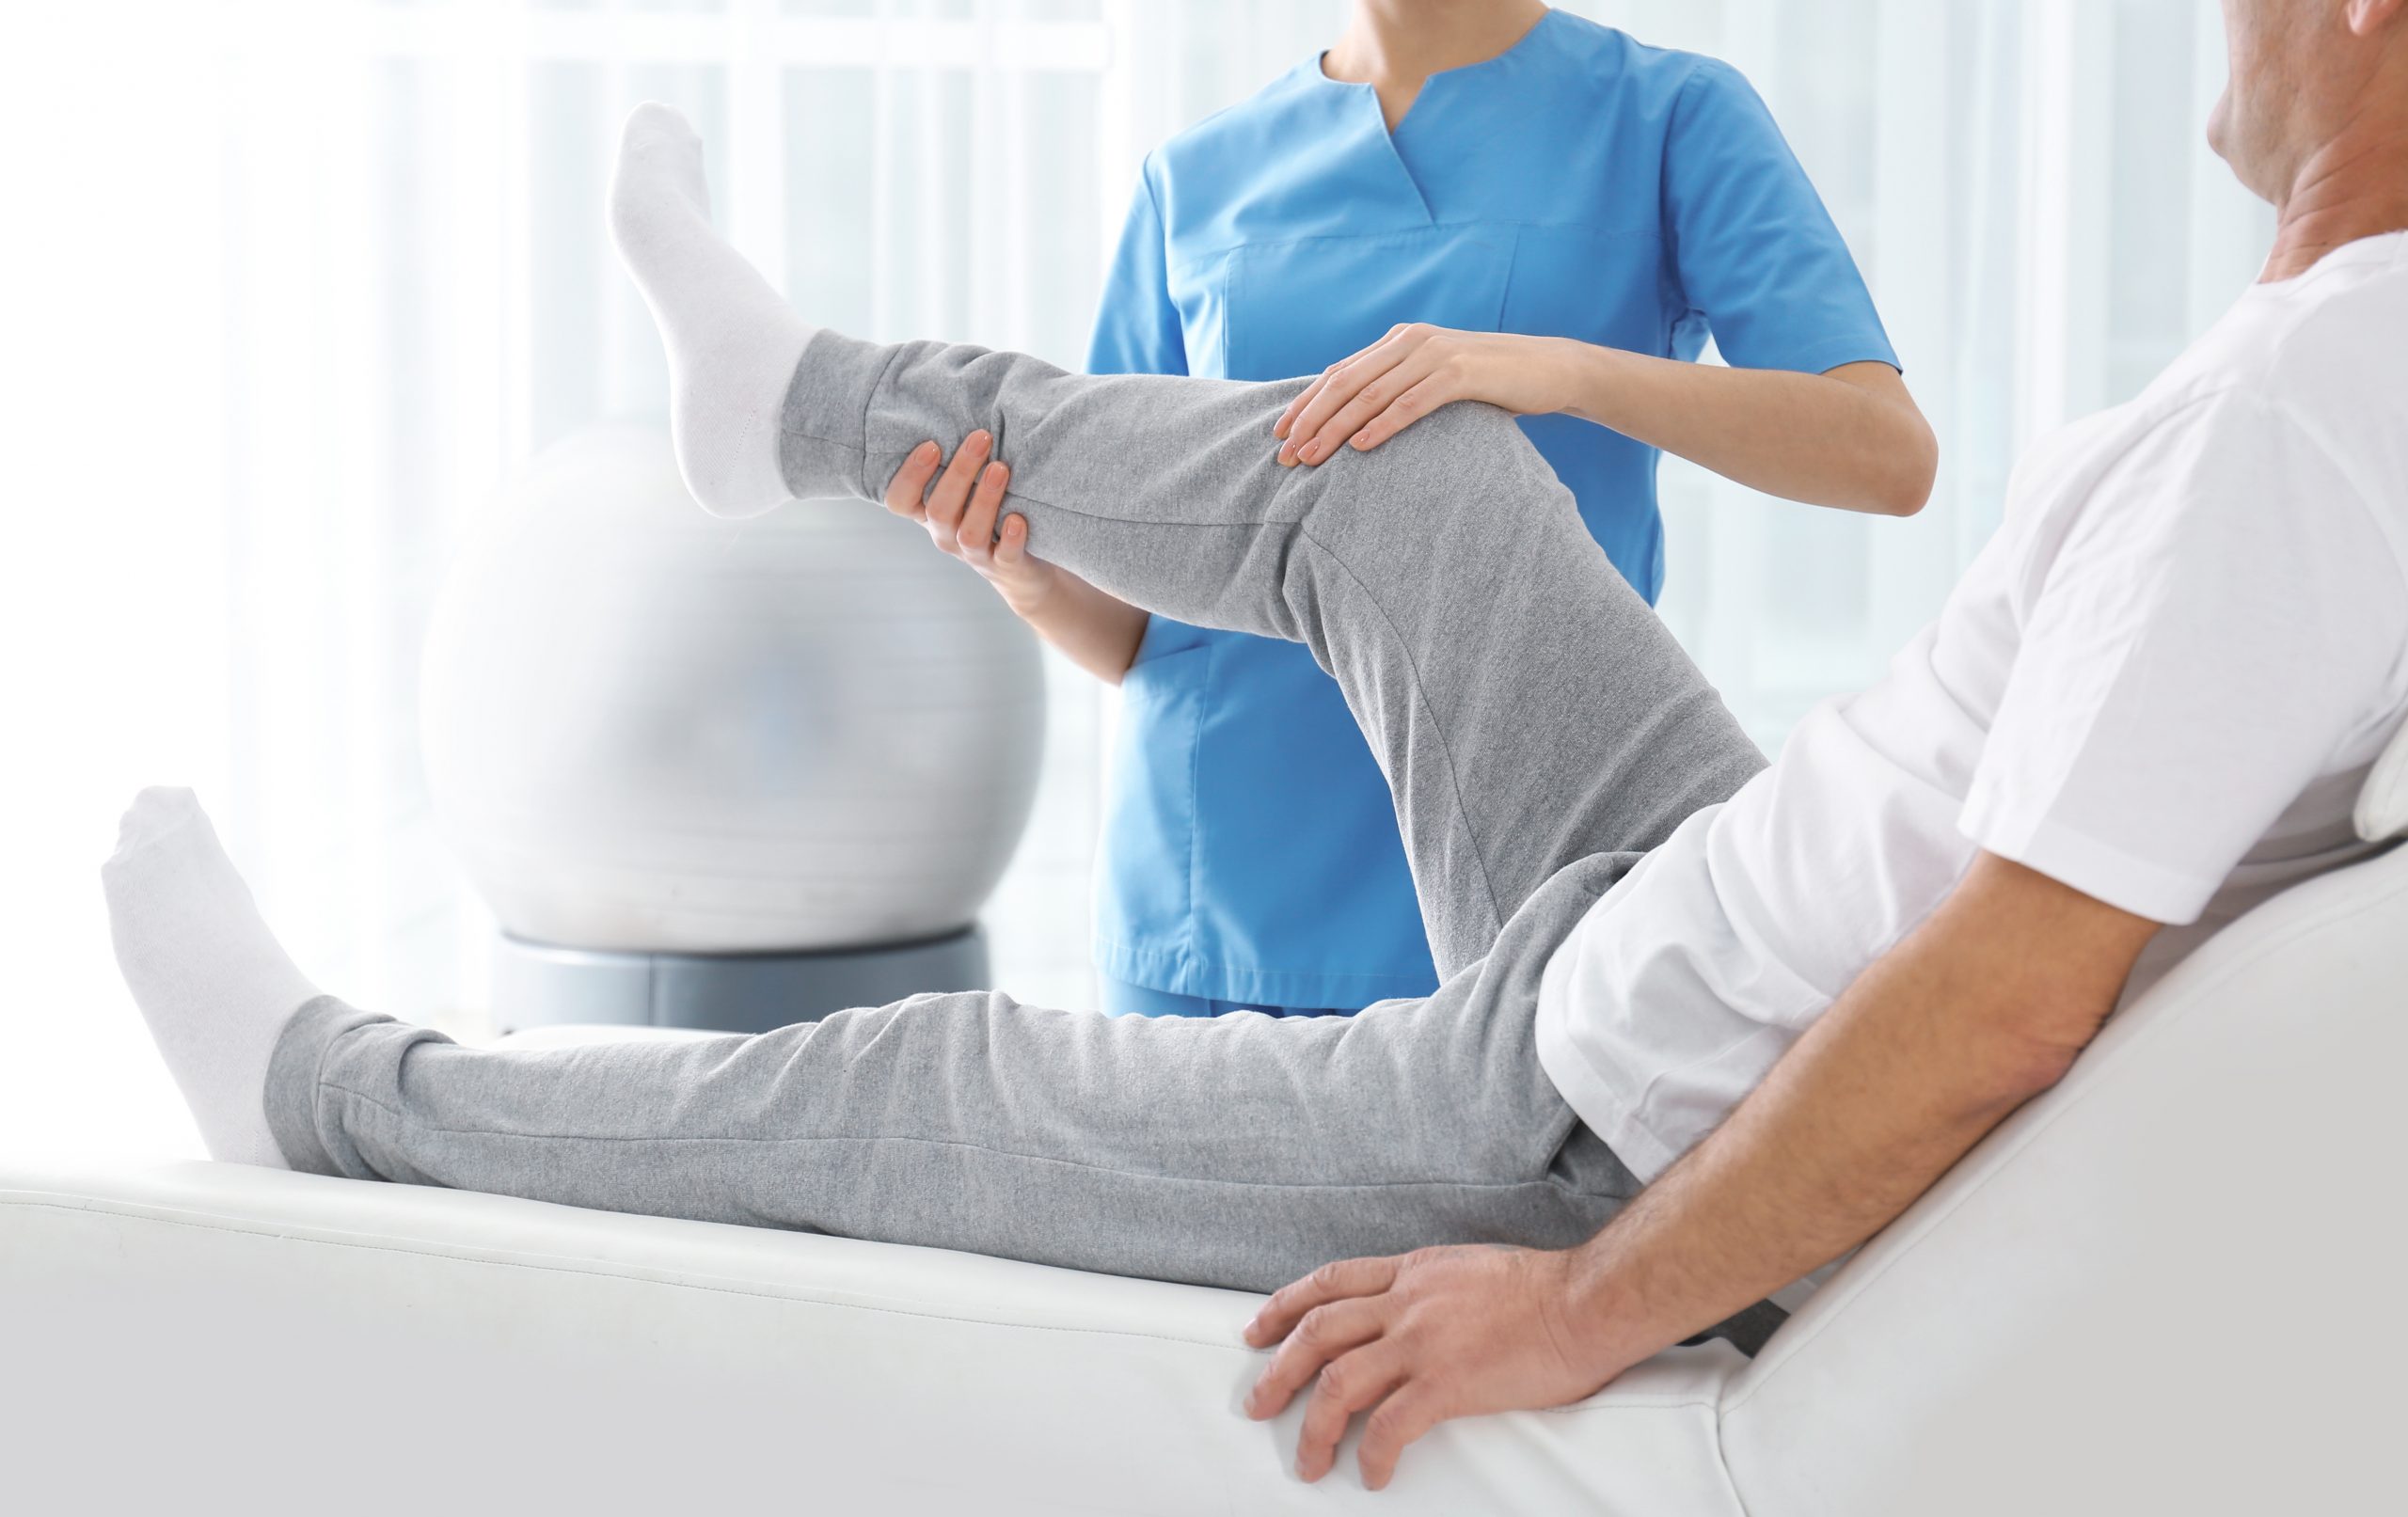 What qualifications do our physiotherapists have?